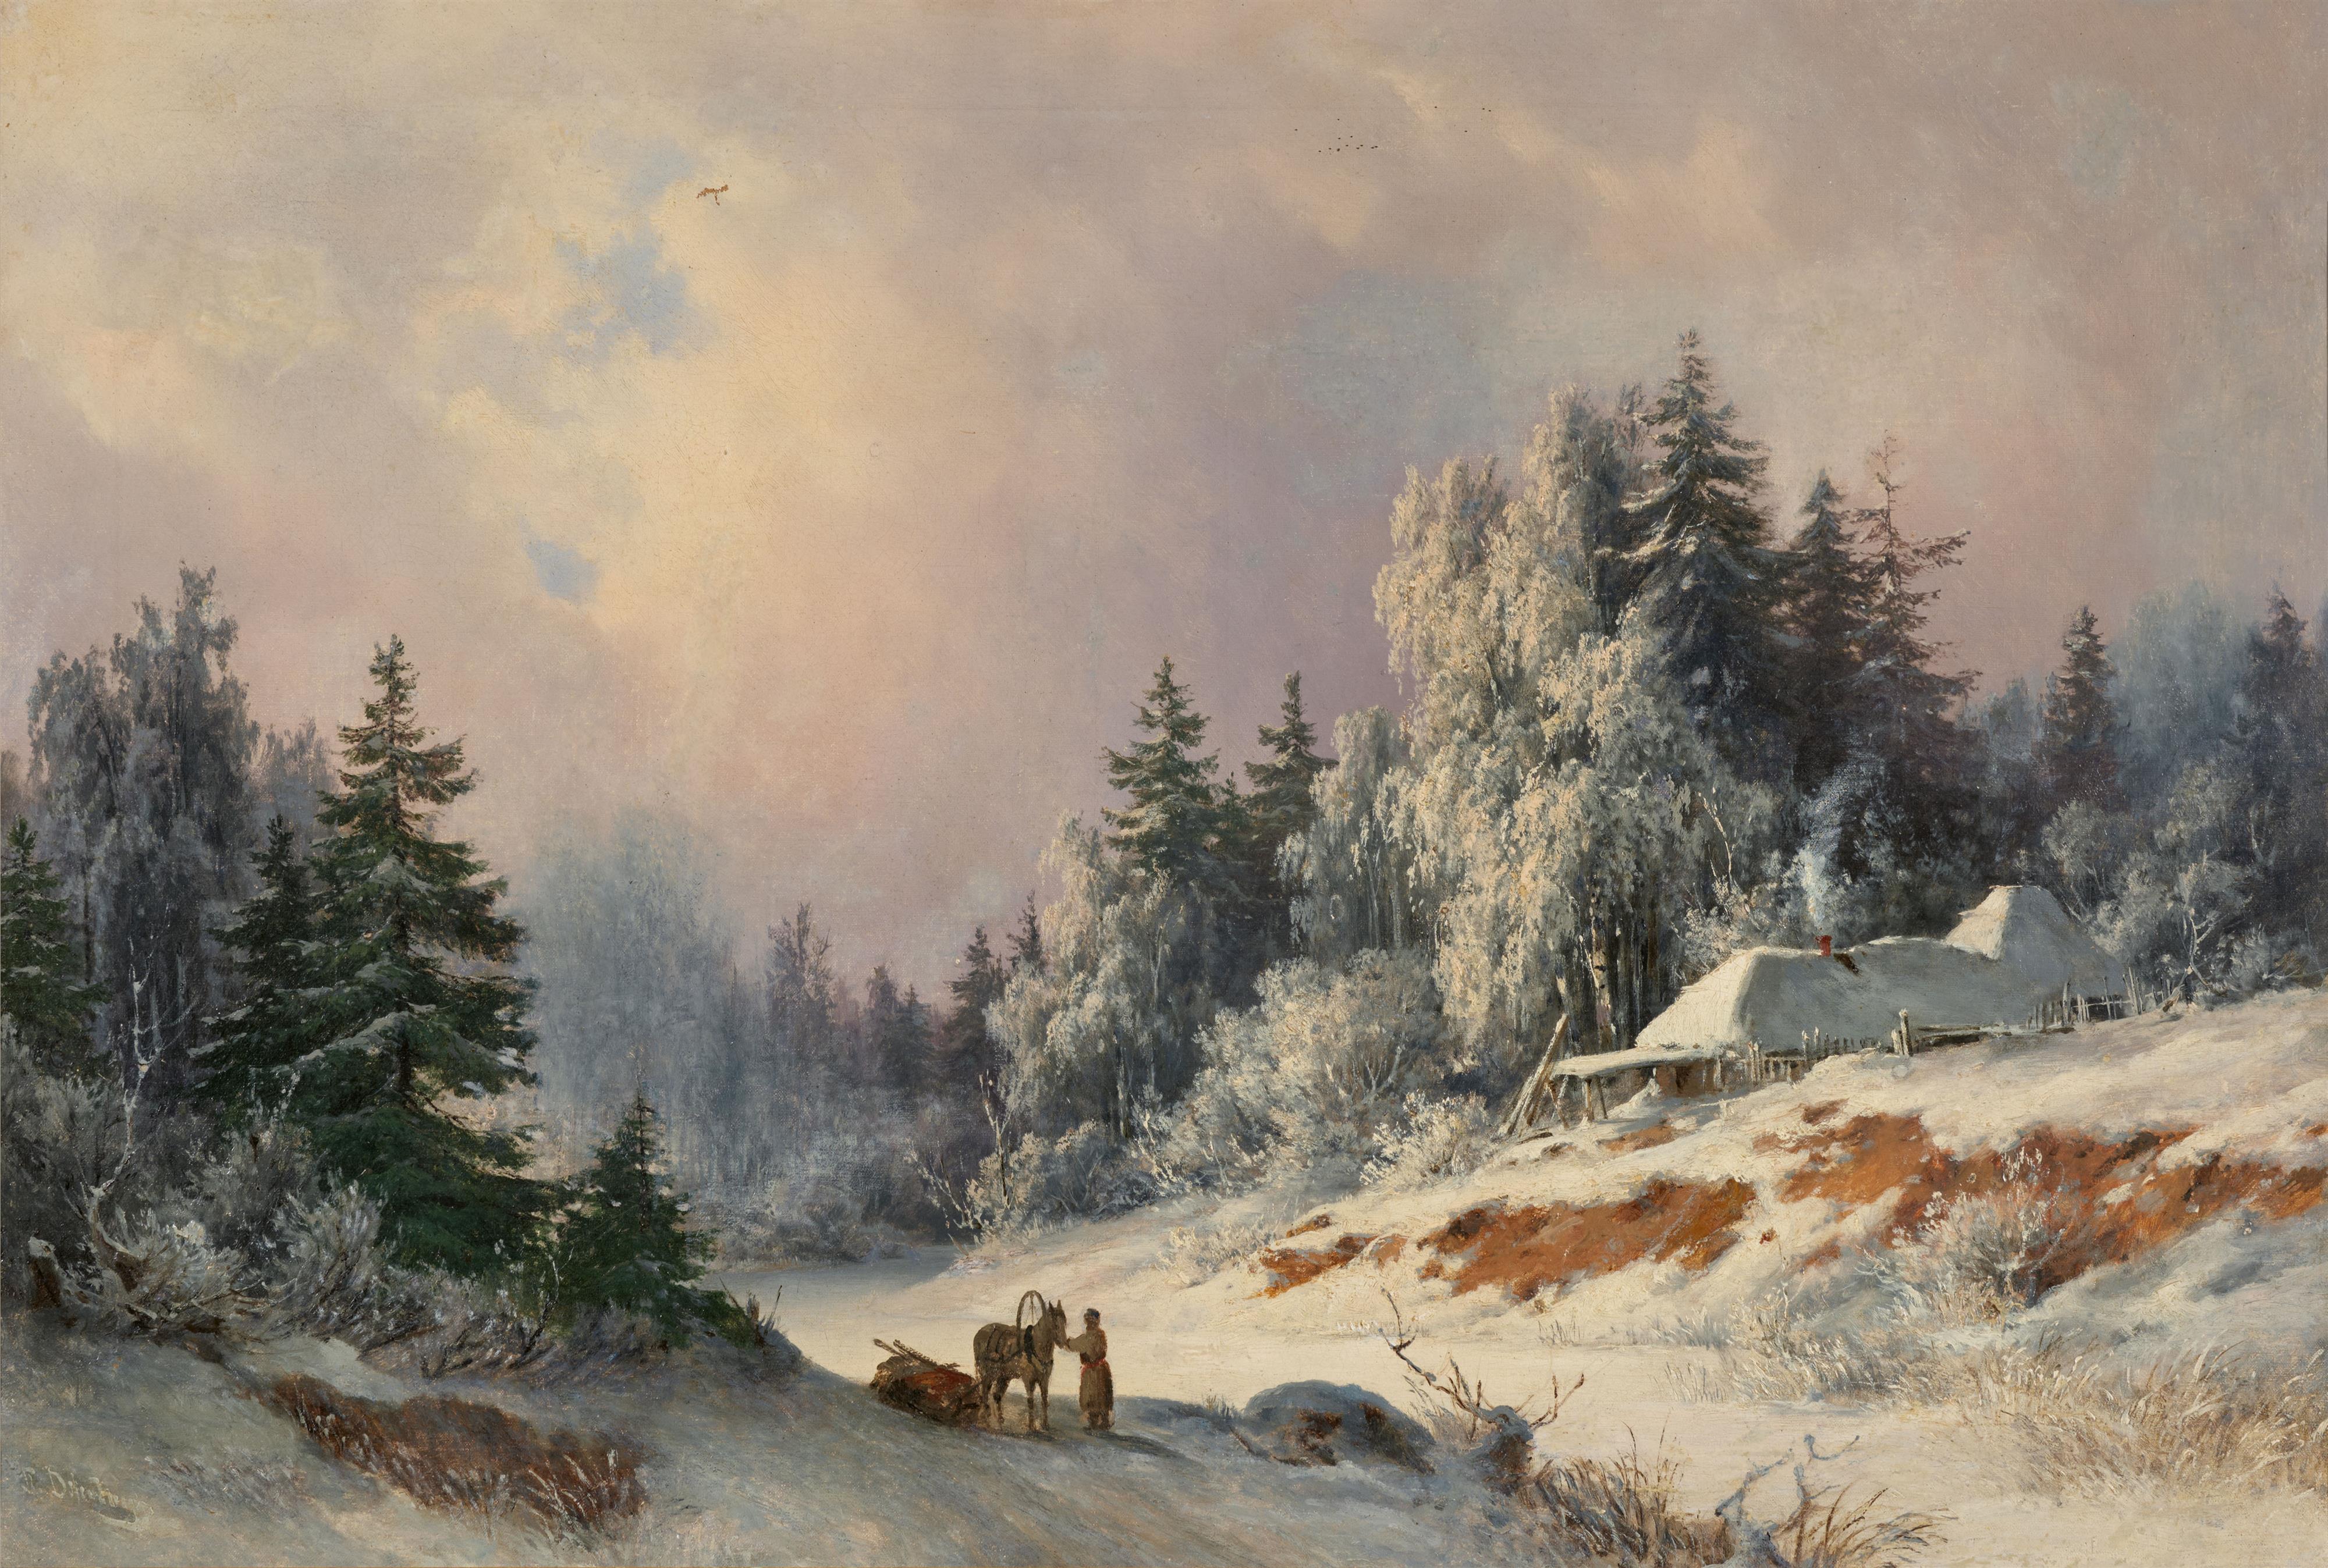 Pavel Pavlovich Dshogin - Winter Landscape with a Wood Collector - image-1